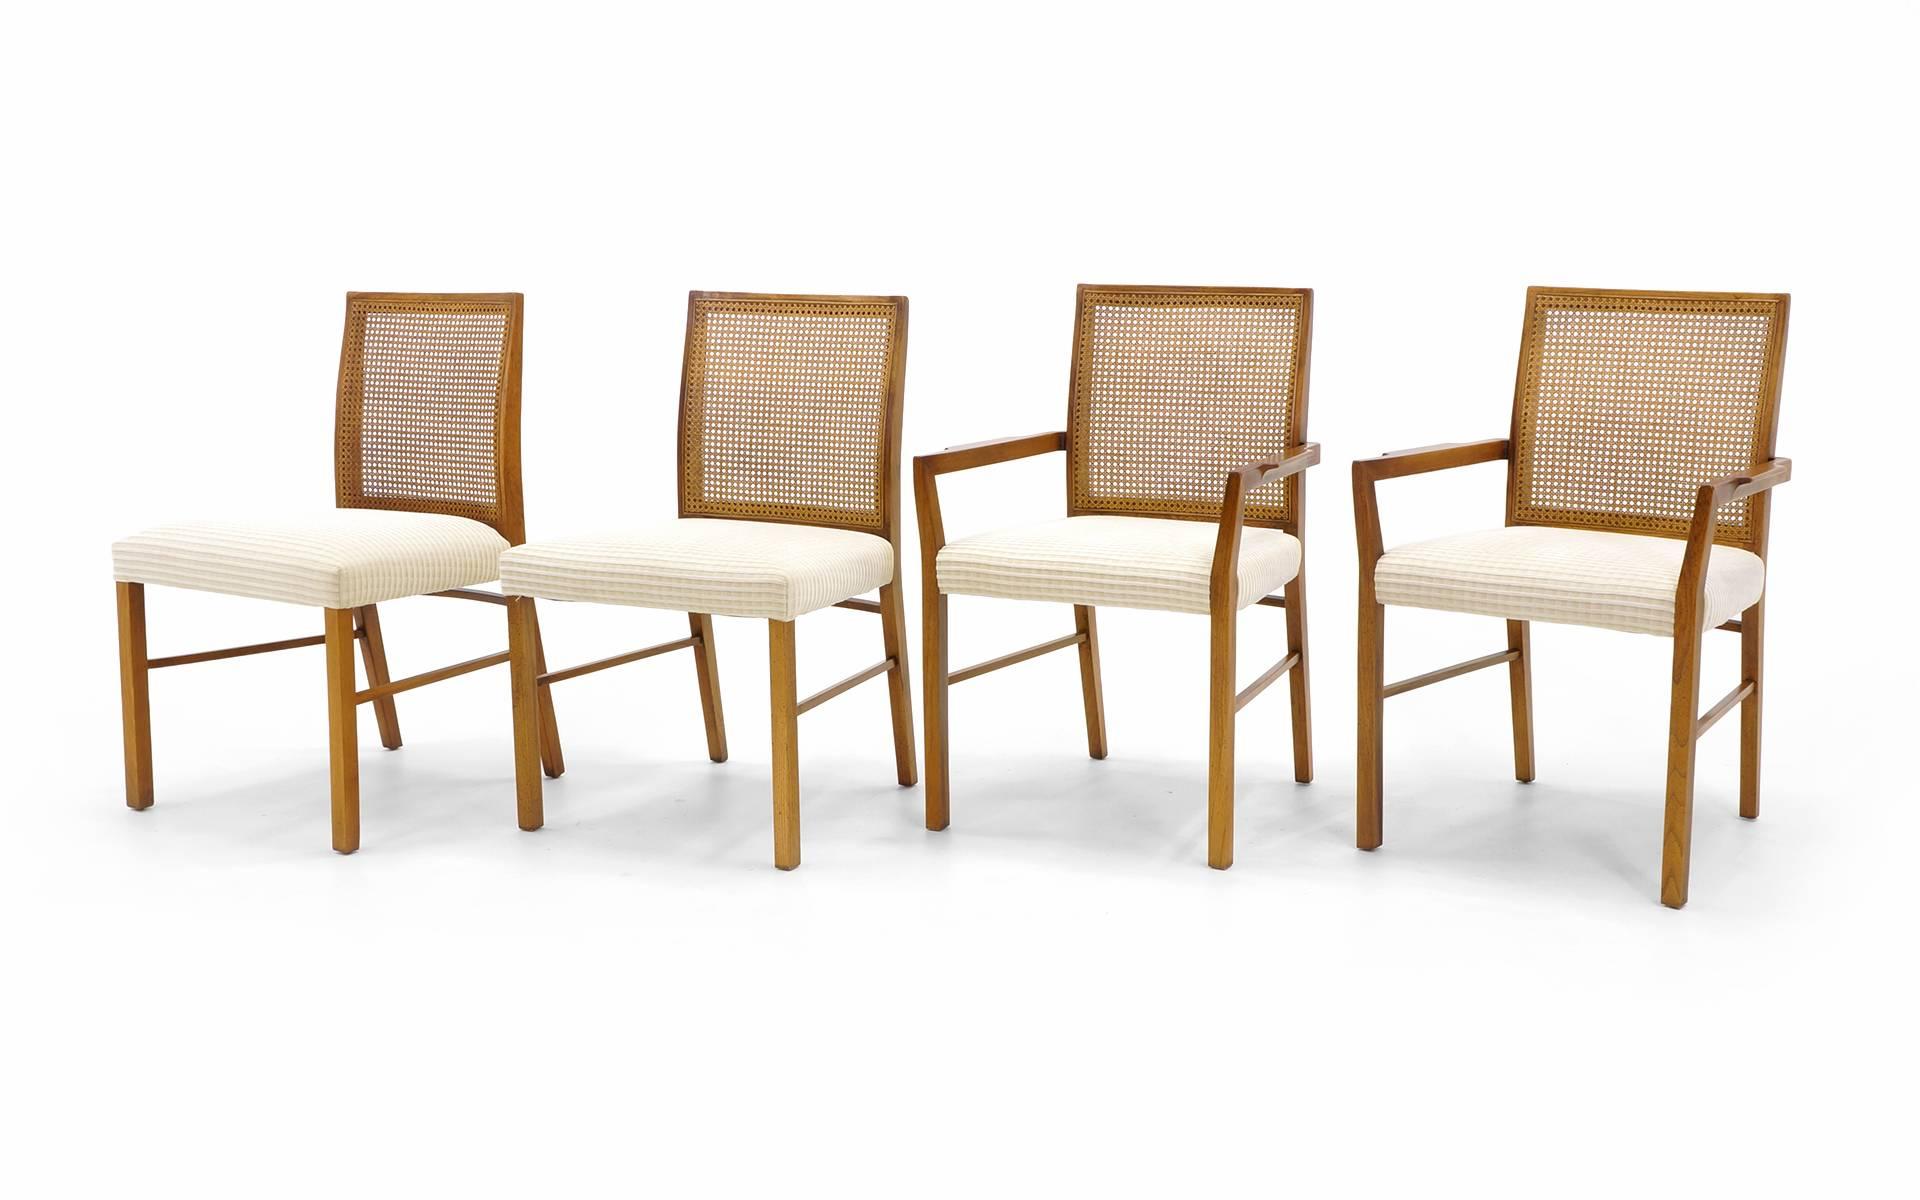 Excellent set of eight mahogany and cane dining chairs (two armchairs and six side chairs). Manufactured by founders, 1950s. Frames are all original and in excellent condition. Fabric is good, but would benefit from an upgrade. Dimensions are below.